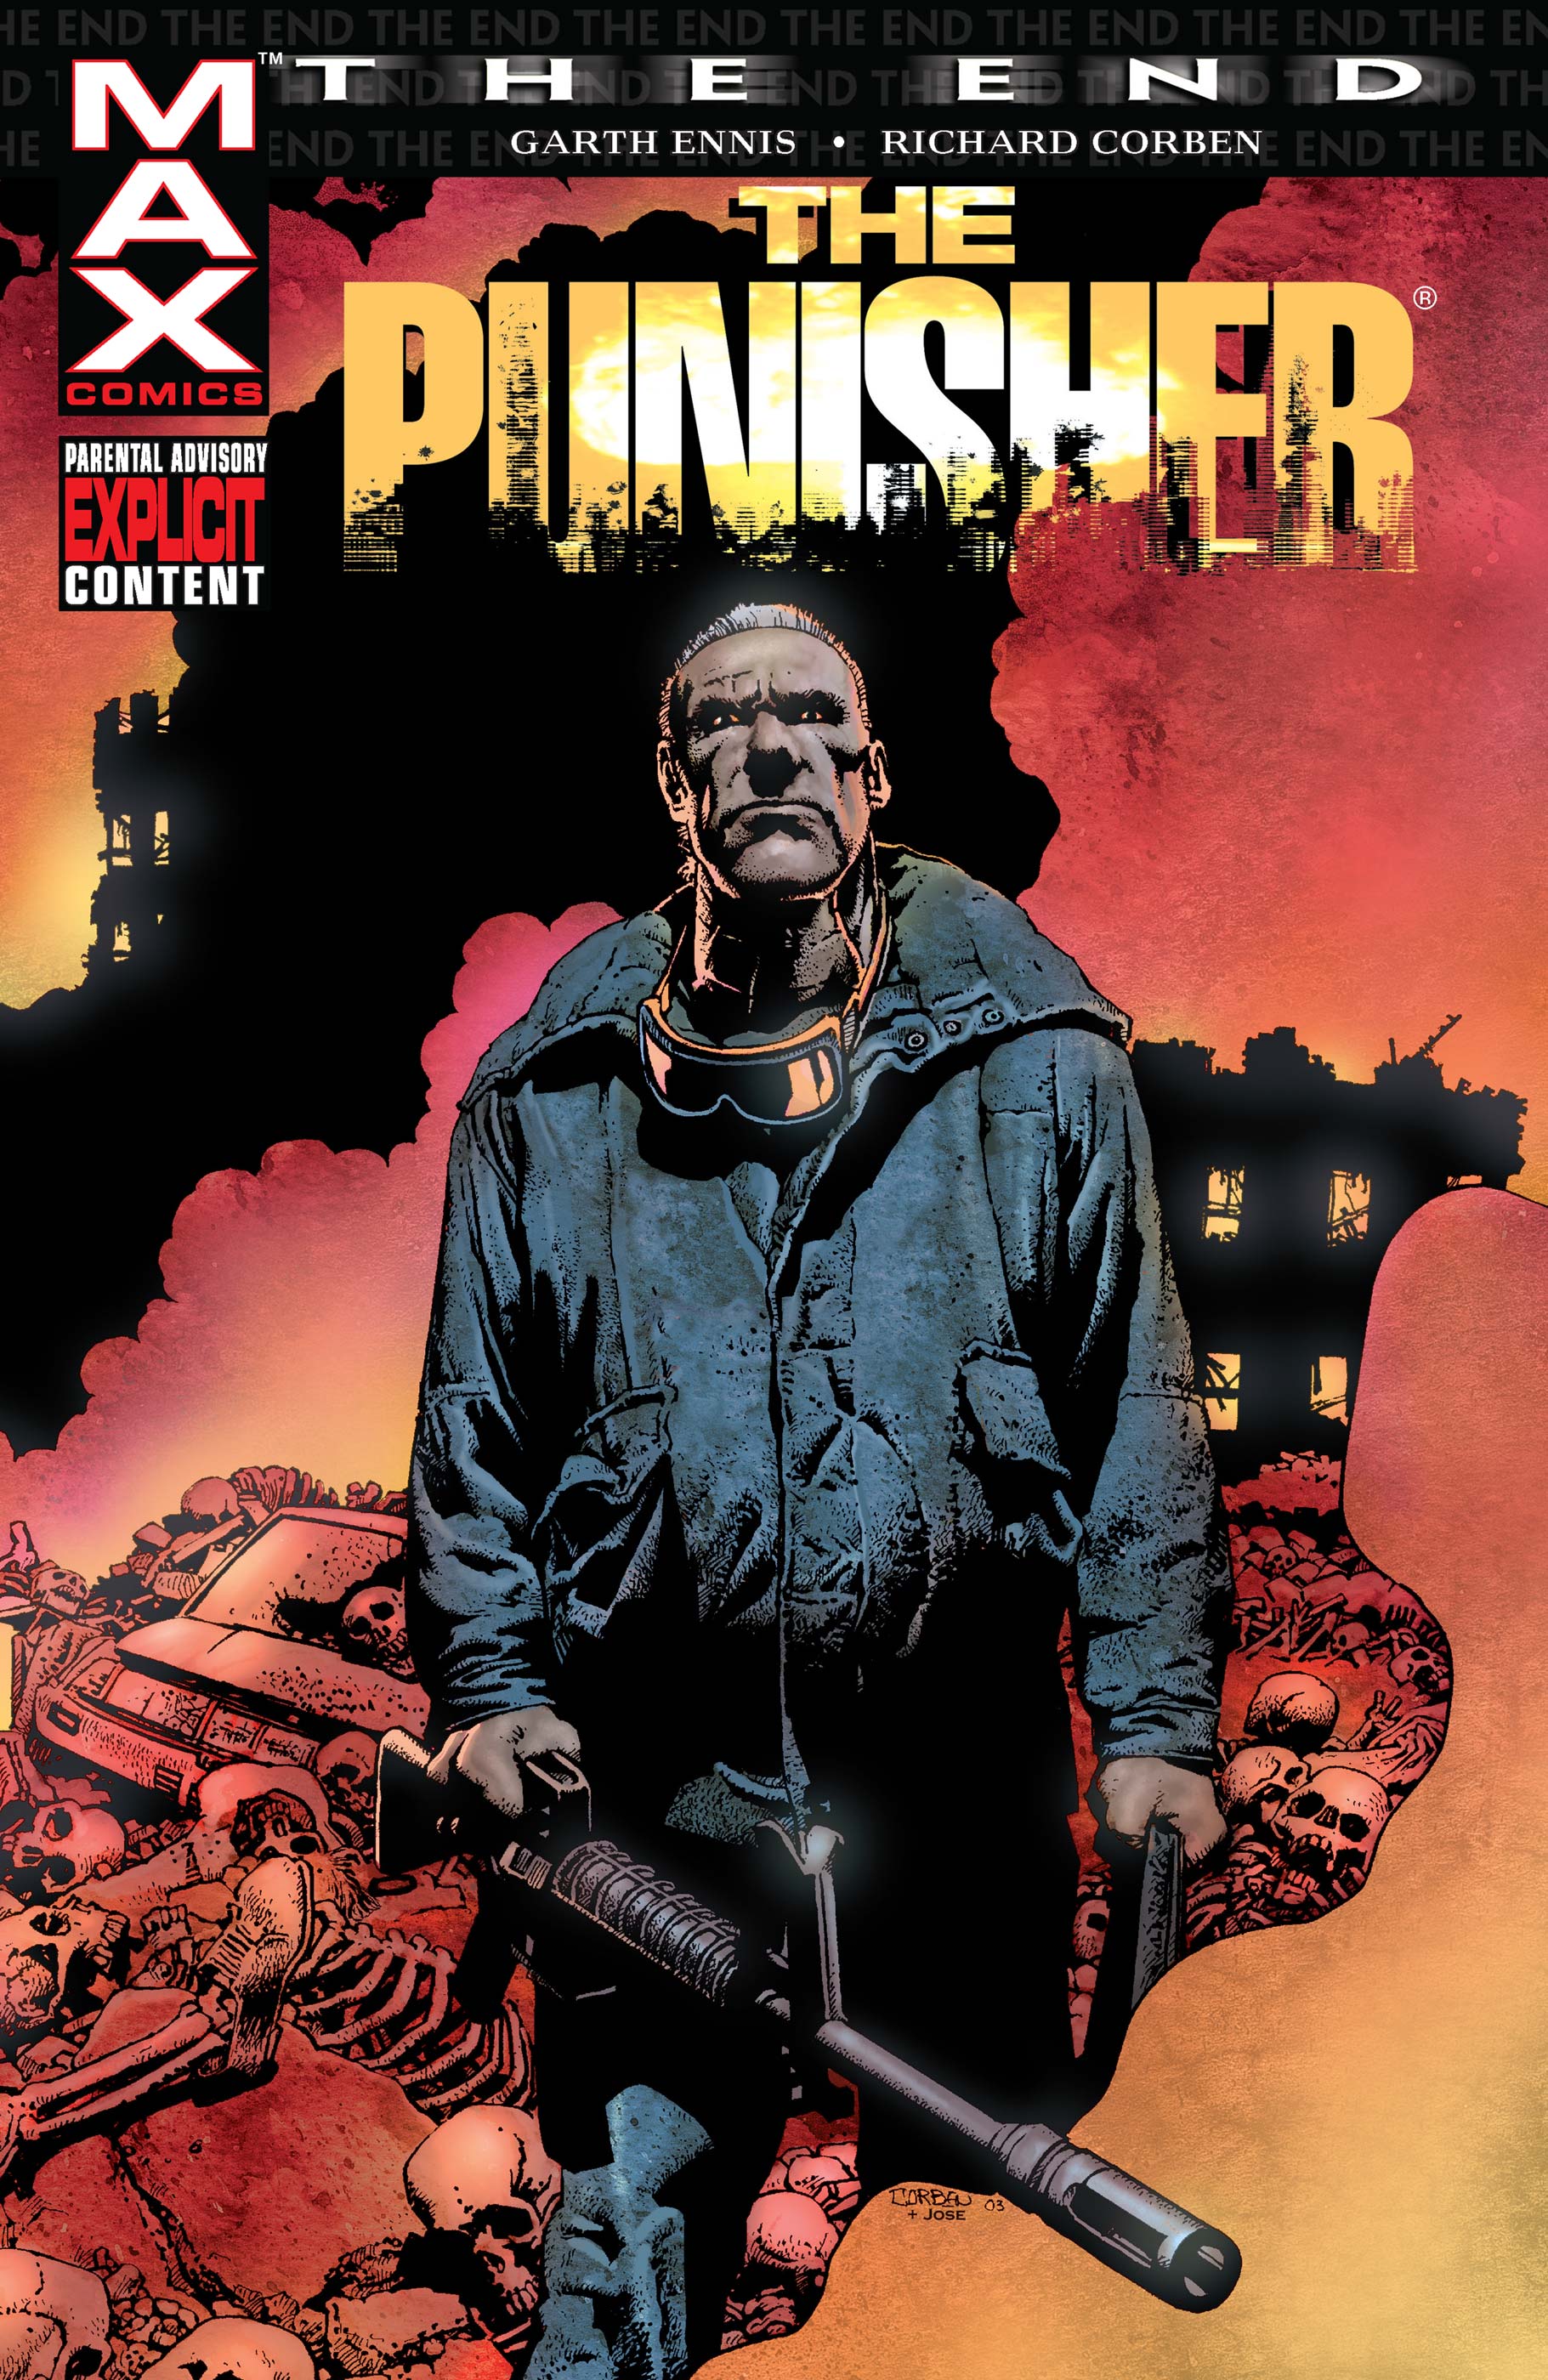 Punisher: The End (2004) #1